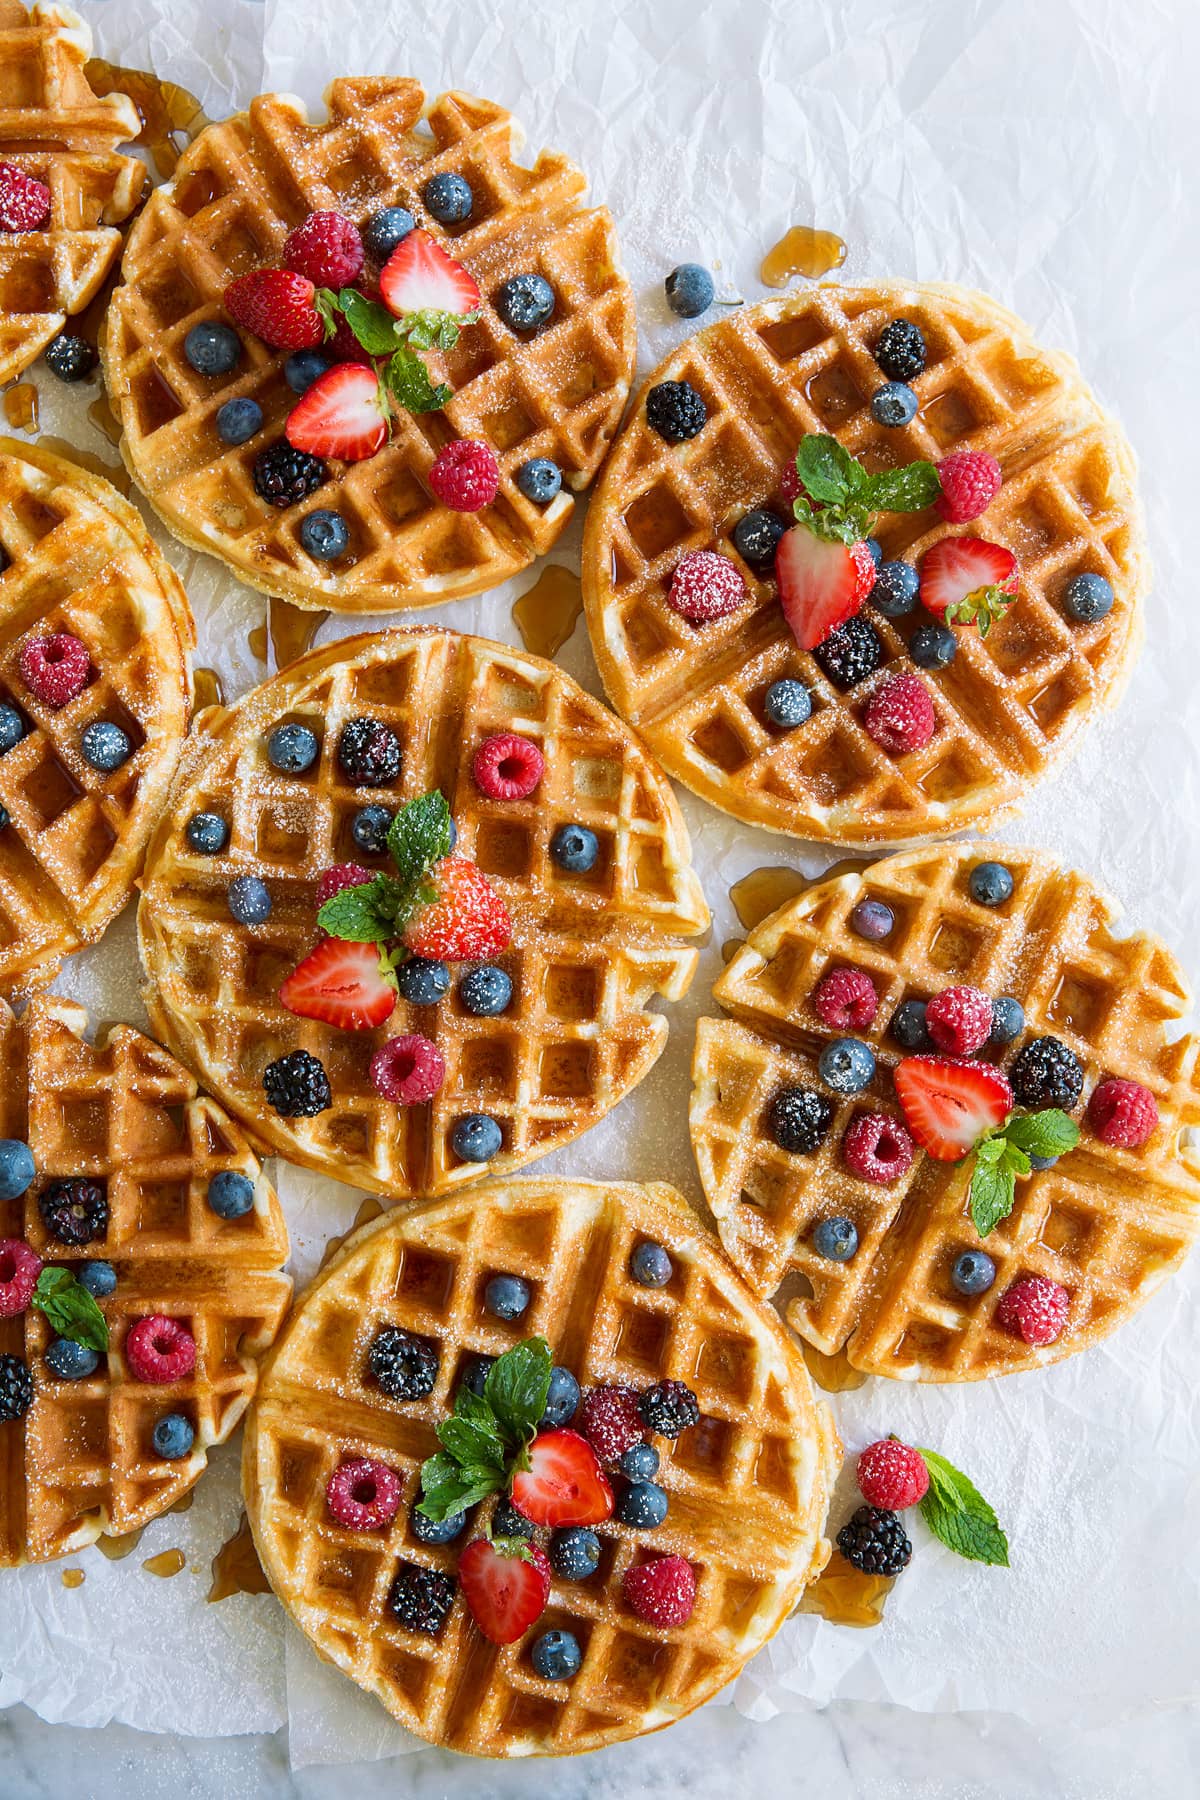 Best Belgian Waffle Recipe Light Fluffy and Crisp - Cooking Classy